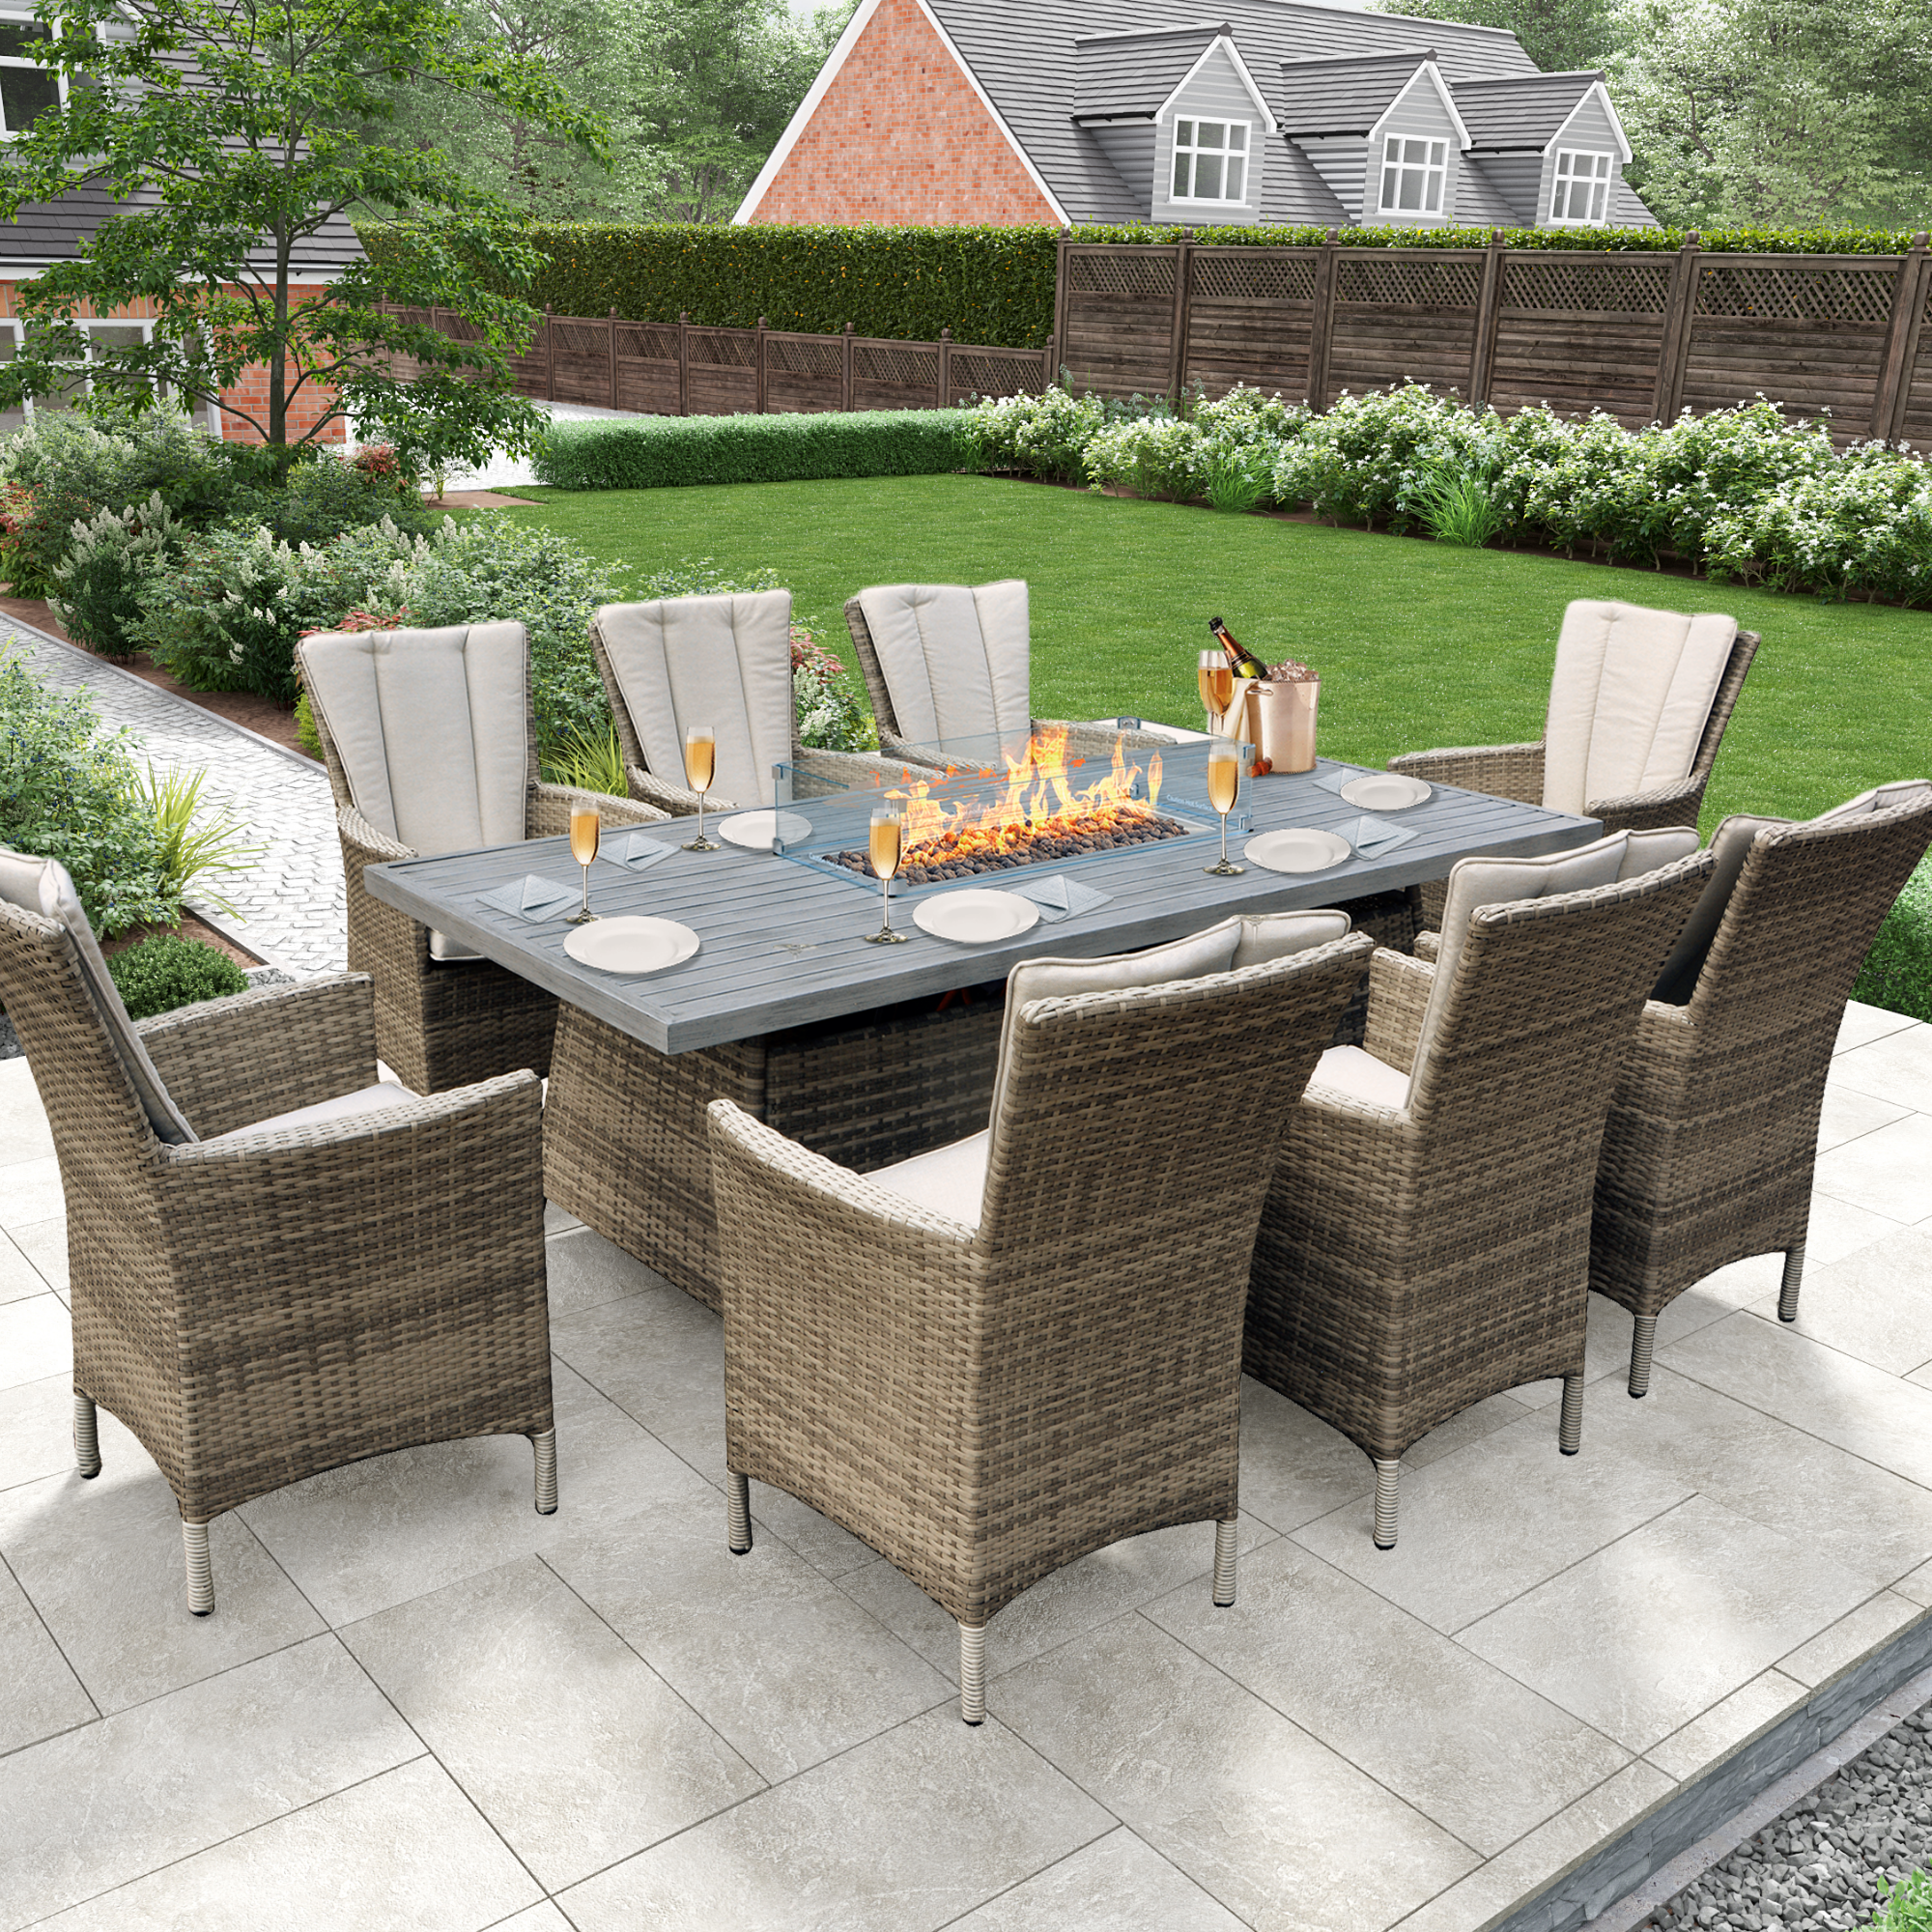 BillyOh Sicily 8 Seater Outdoor Rattan Garden Dining Set with Firepit Table - 8 Seater Long Rattan with Firepit